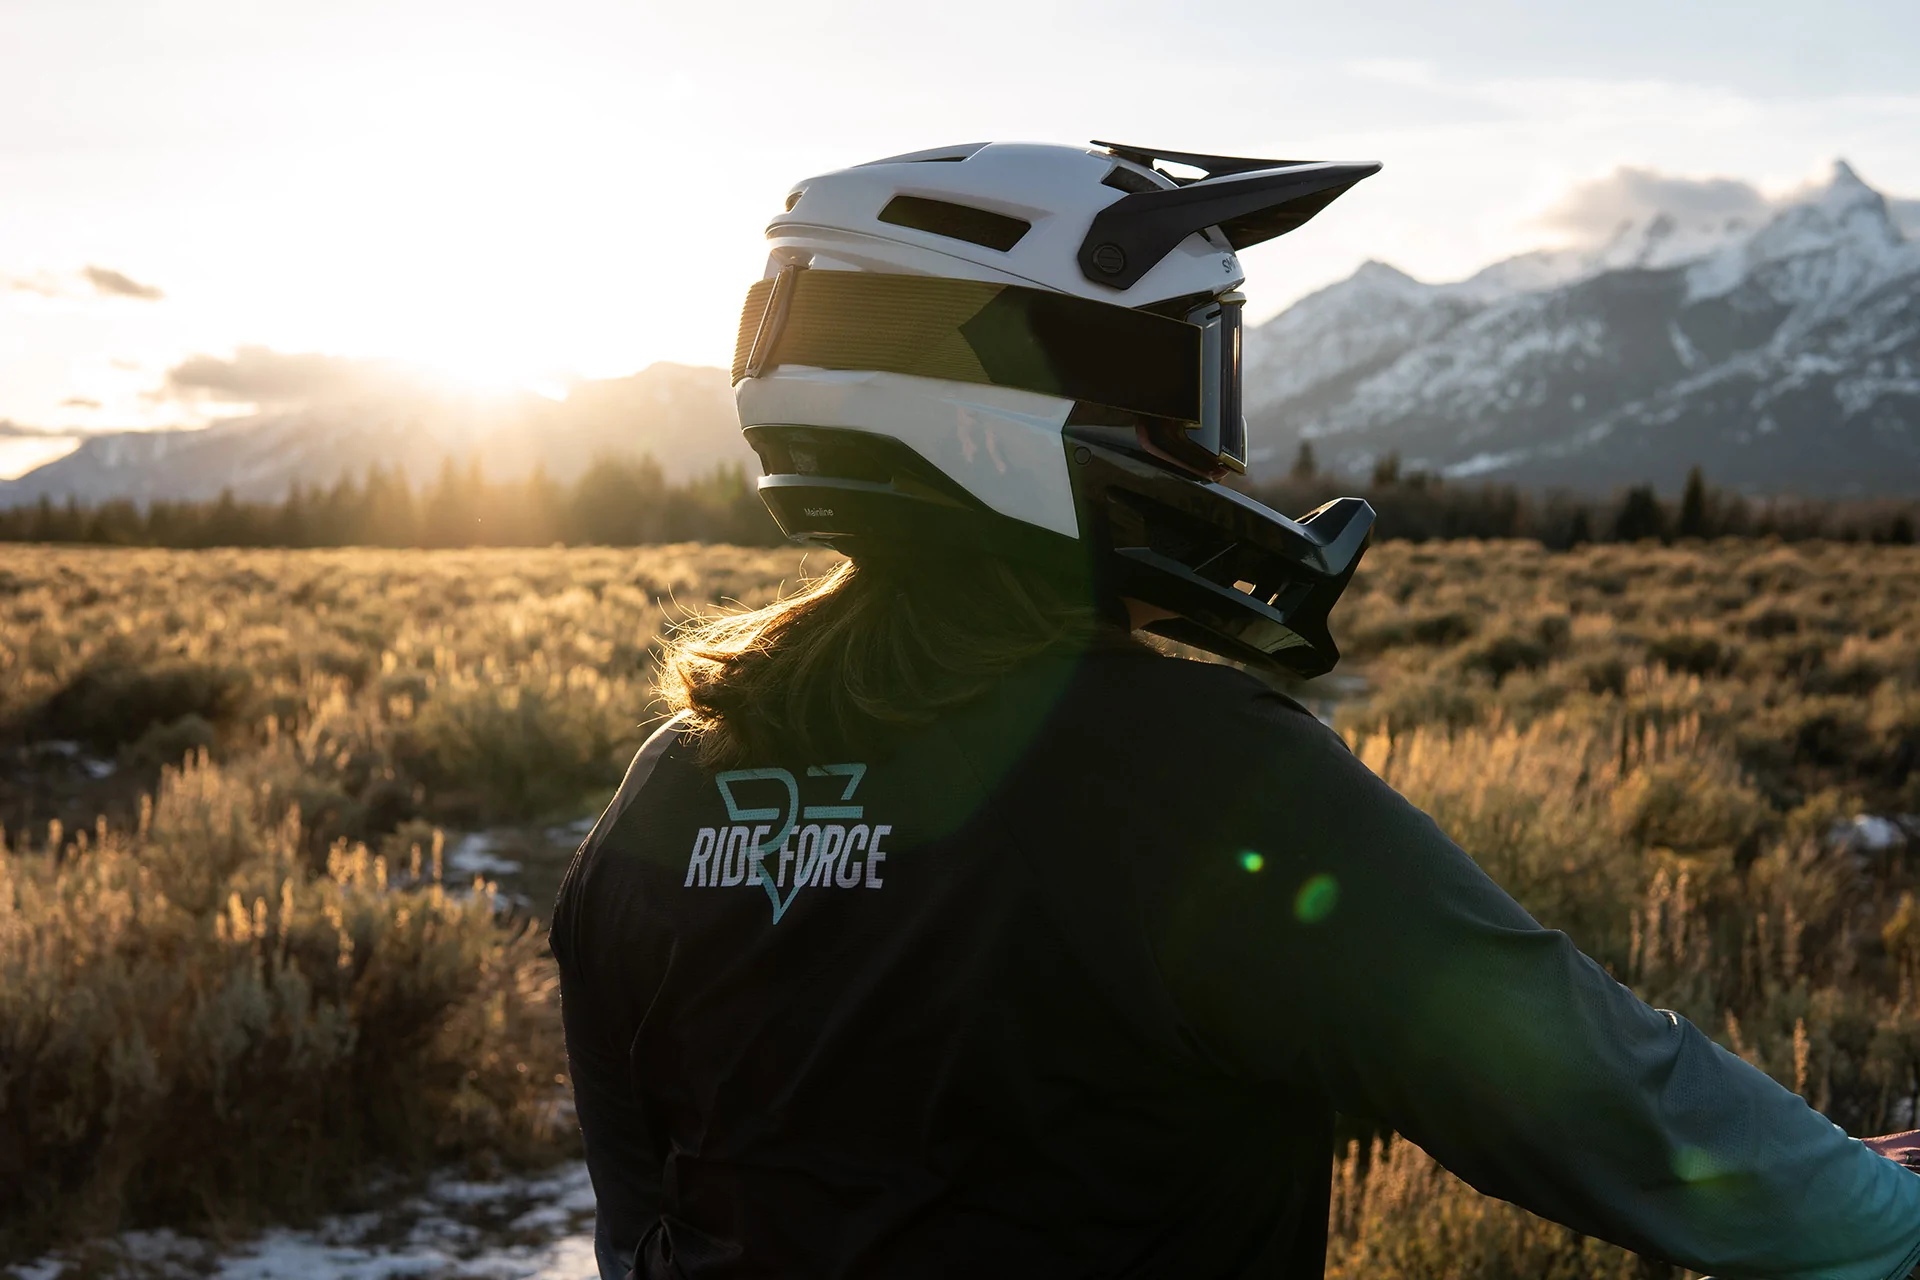 A mountain biker wears a helmet and Ride Force jersey looks out over a mountain valley at sunset.